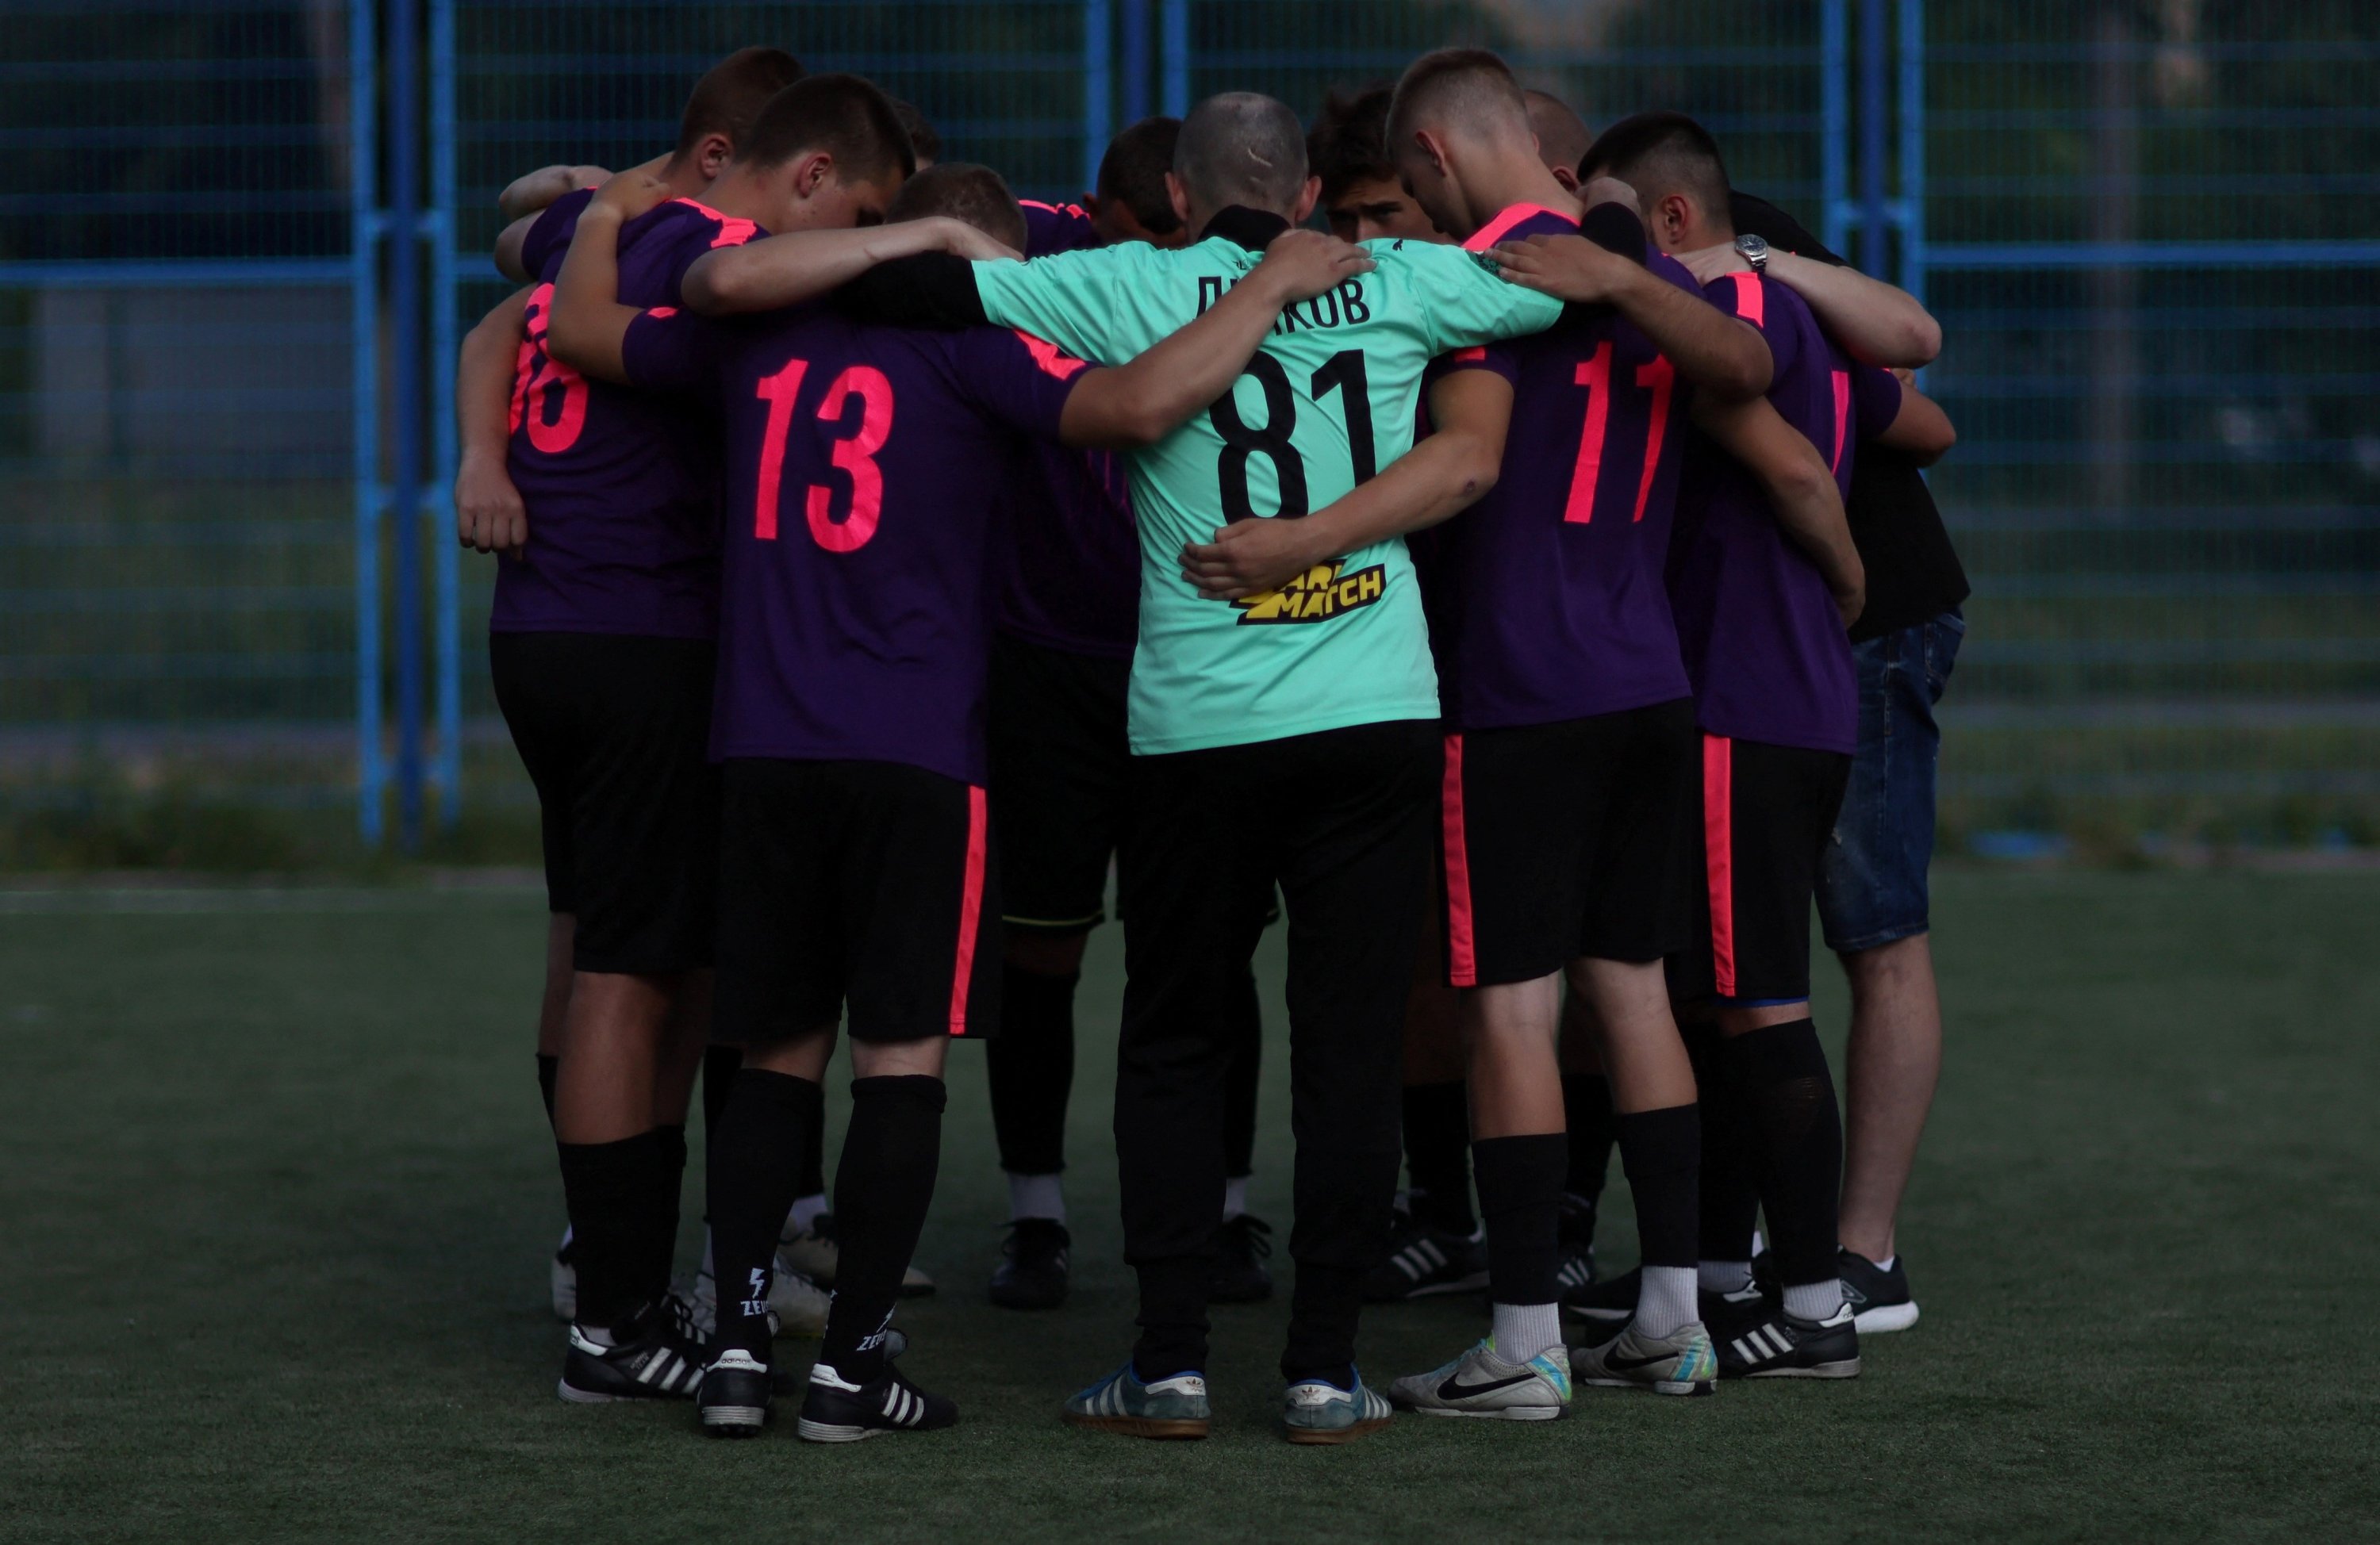 Team Hasy takes a moment before competing in the final match of the “Heroes of Kharkiv” football tournament which honored Andrey Doroshev, a beloved children’s coach, who was killed in a shelling attack last week, Kharkiv, Ukraine, July 3, 2022. (Reuters Photo)